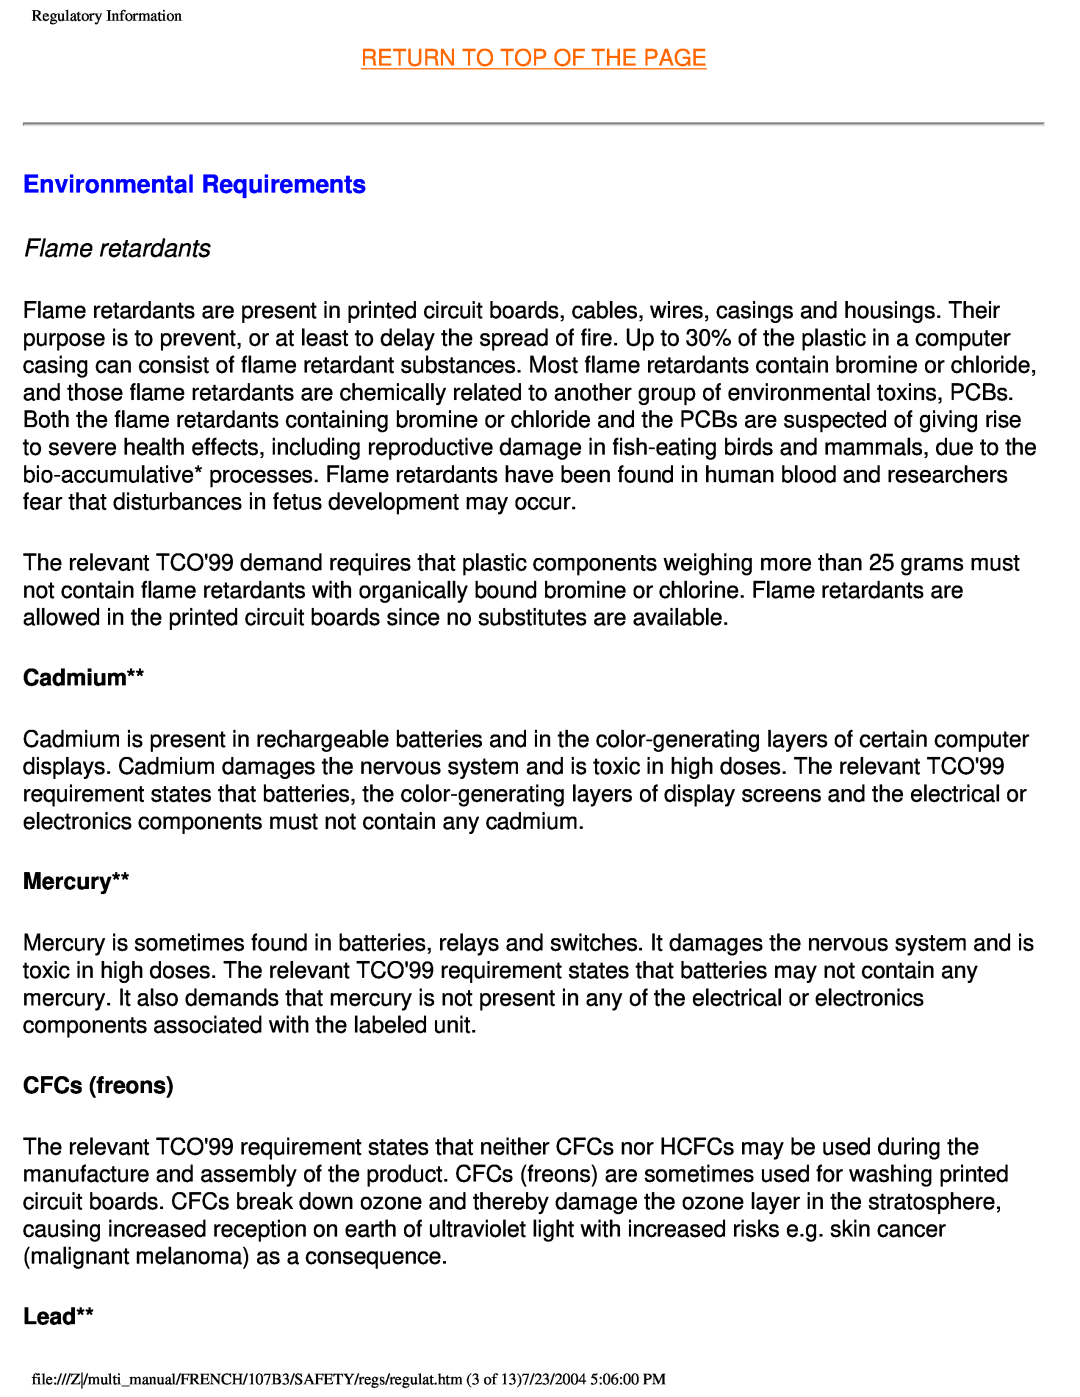 Philips 107B3 user manual Environmental Requirements, Flame retardants, Return To Top Of The Page 